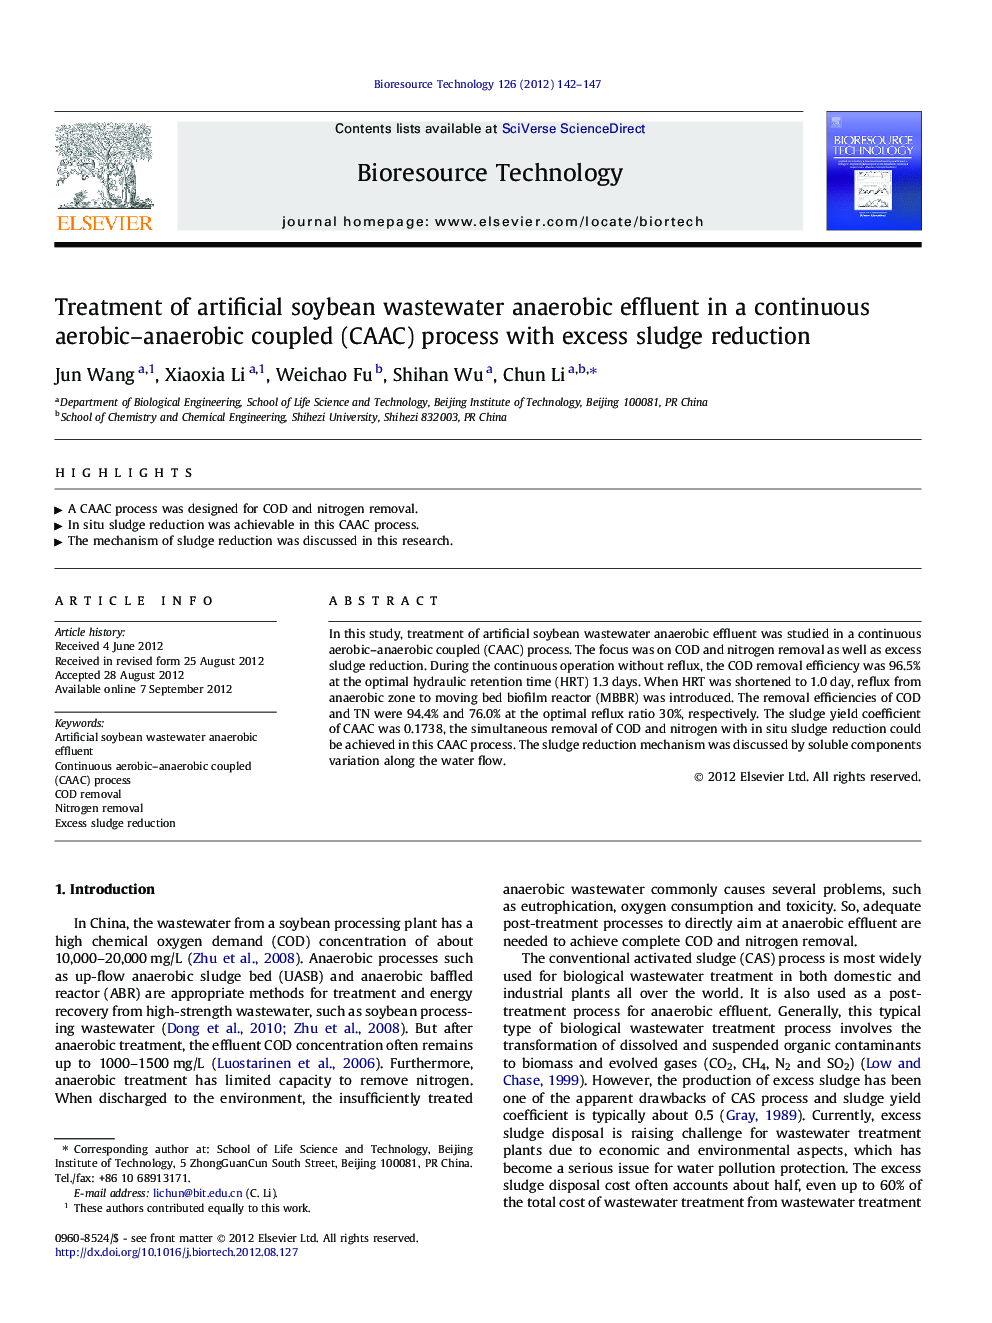 Treatment of artificial soybean wastewater anaerobic effluent in a continuous aerobic–anaerobic coupled (CAAC) process with excess sludge reduction